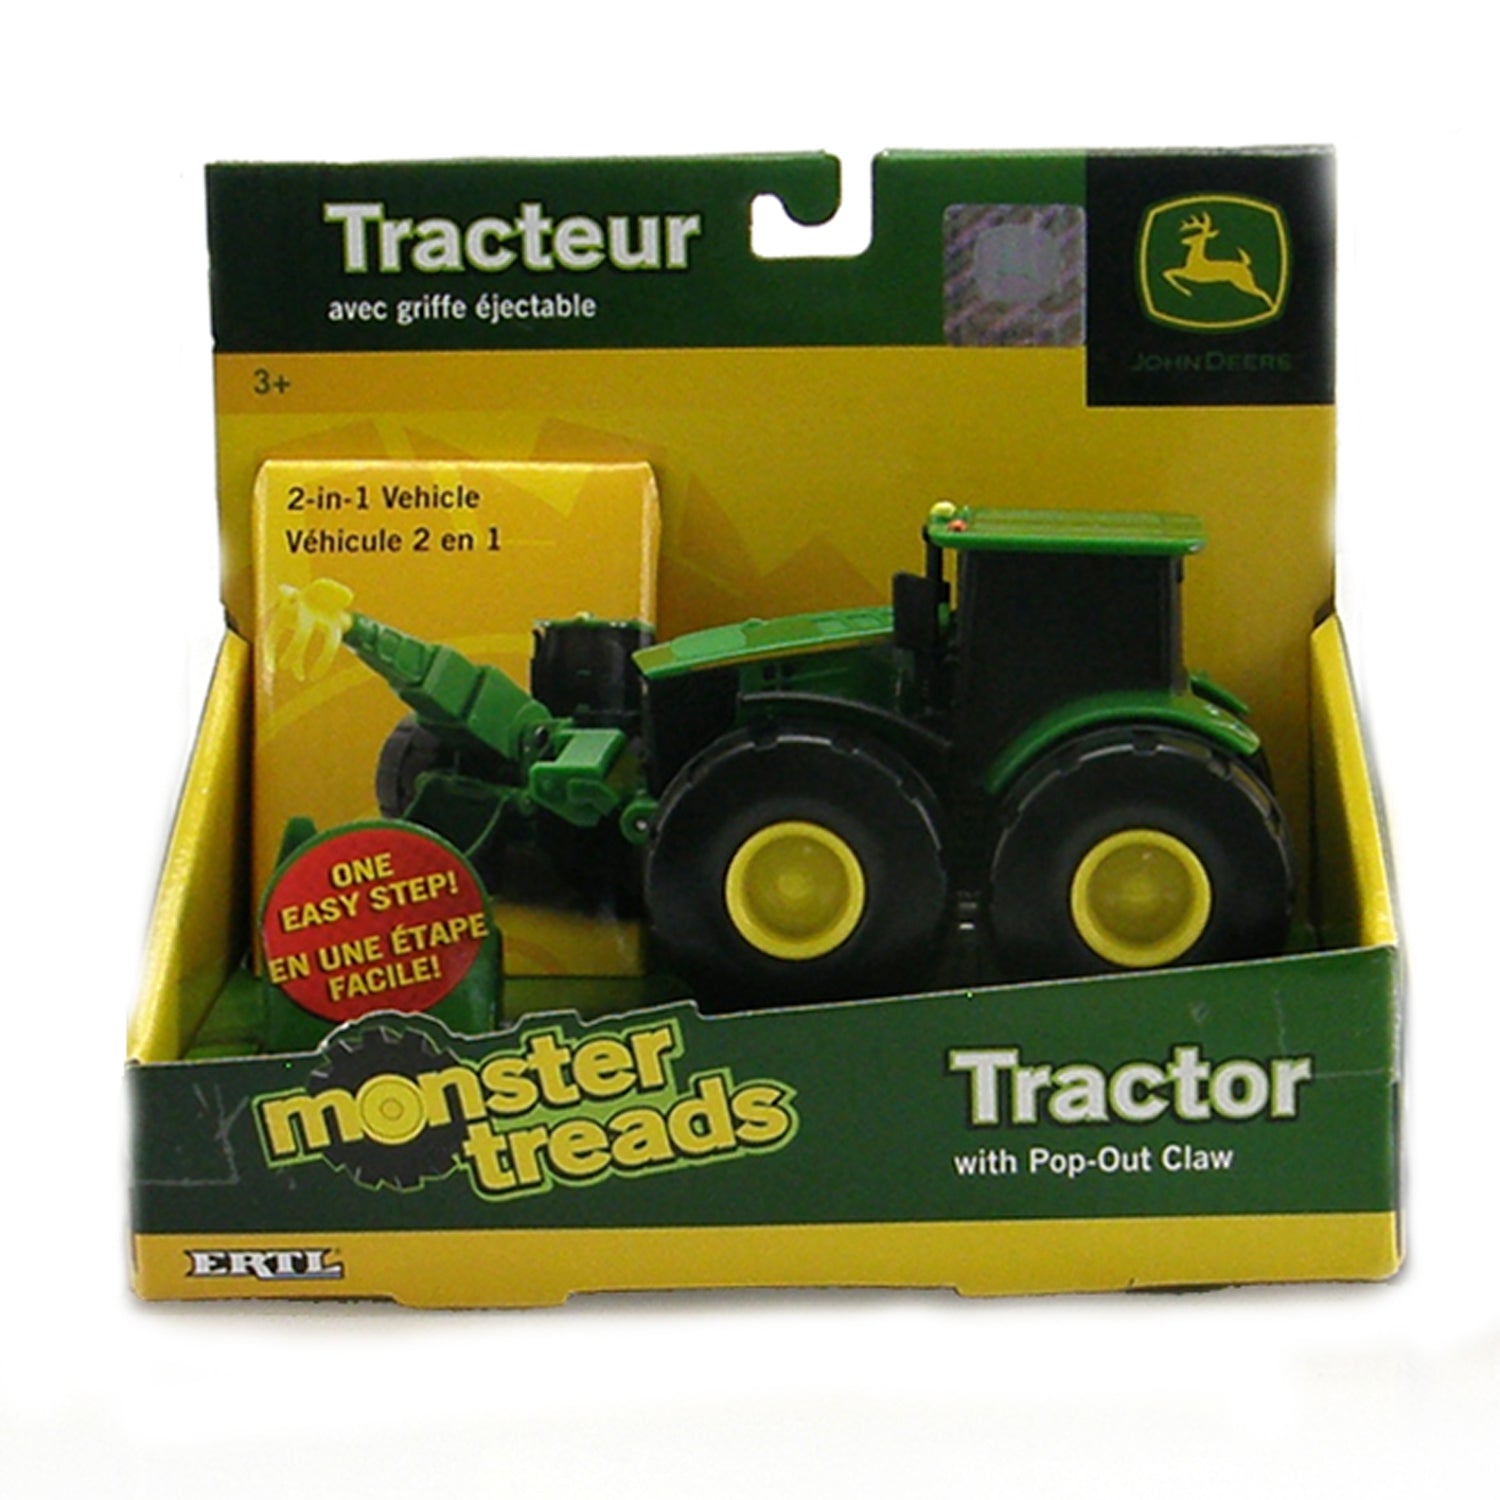 John Deere Toys - Monster Treads Tractor with Pop-Out Claw